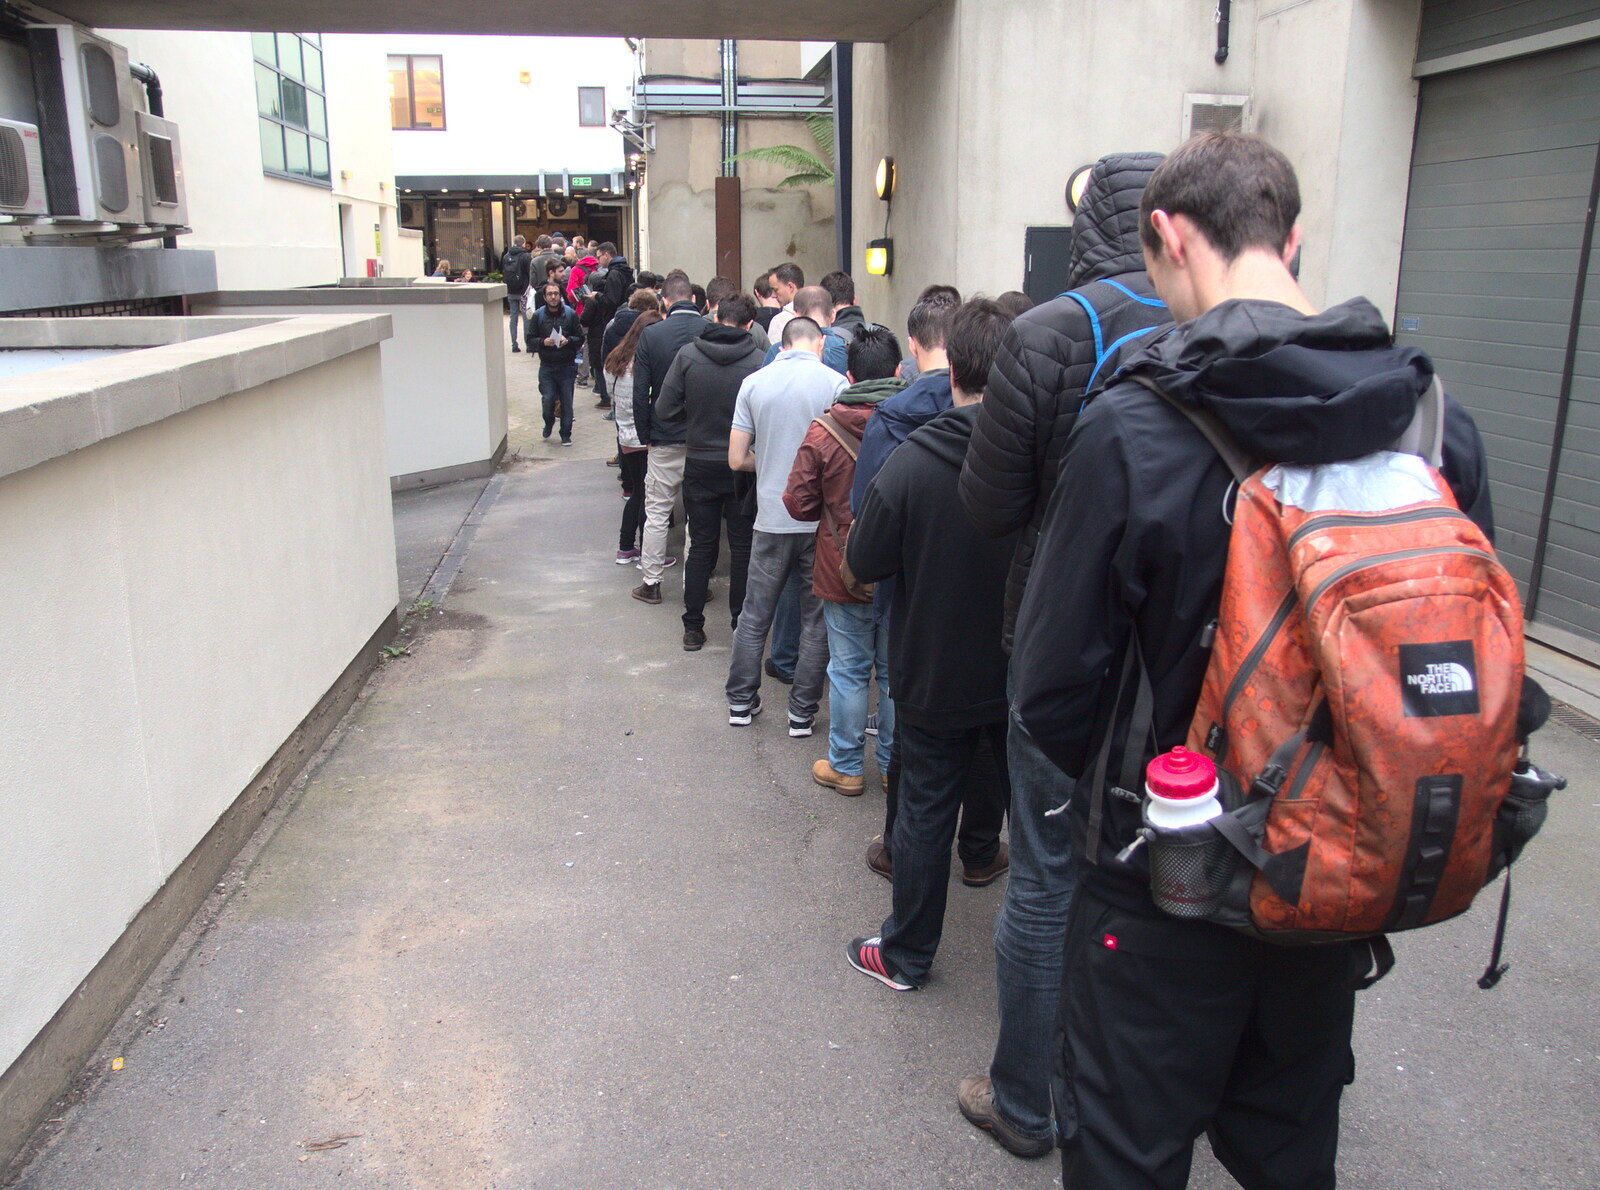 The morning starts off well with a massive queue from Droidcon 2016, Islington, London - 27th October 2016